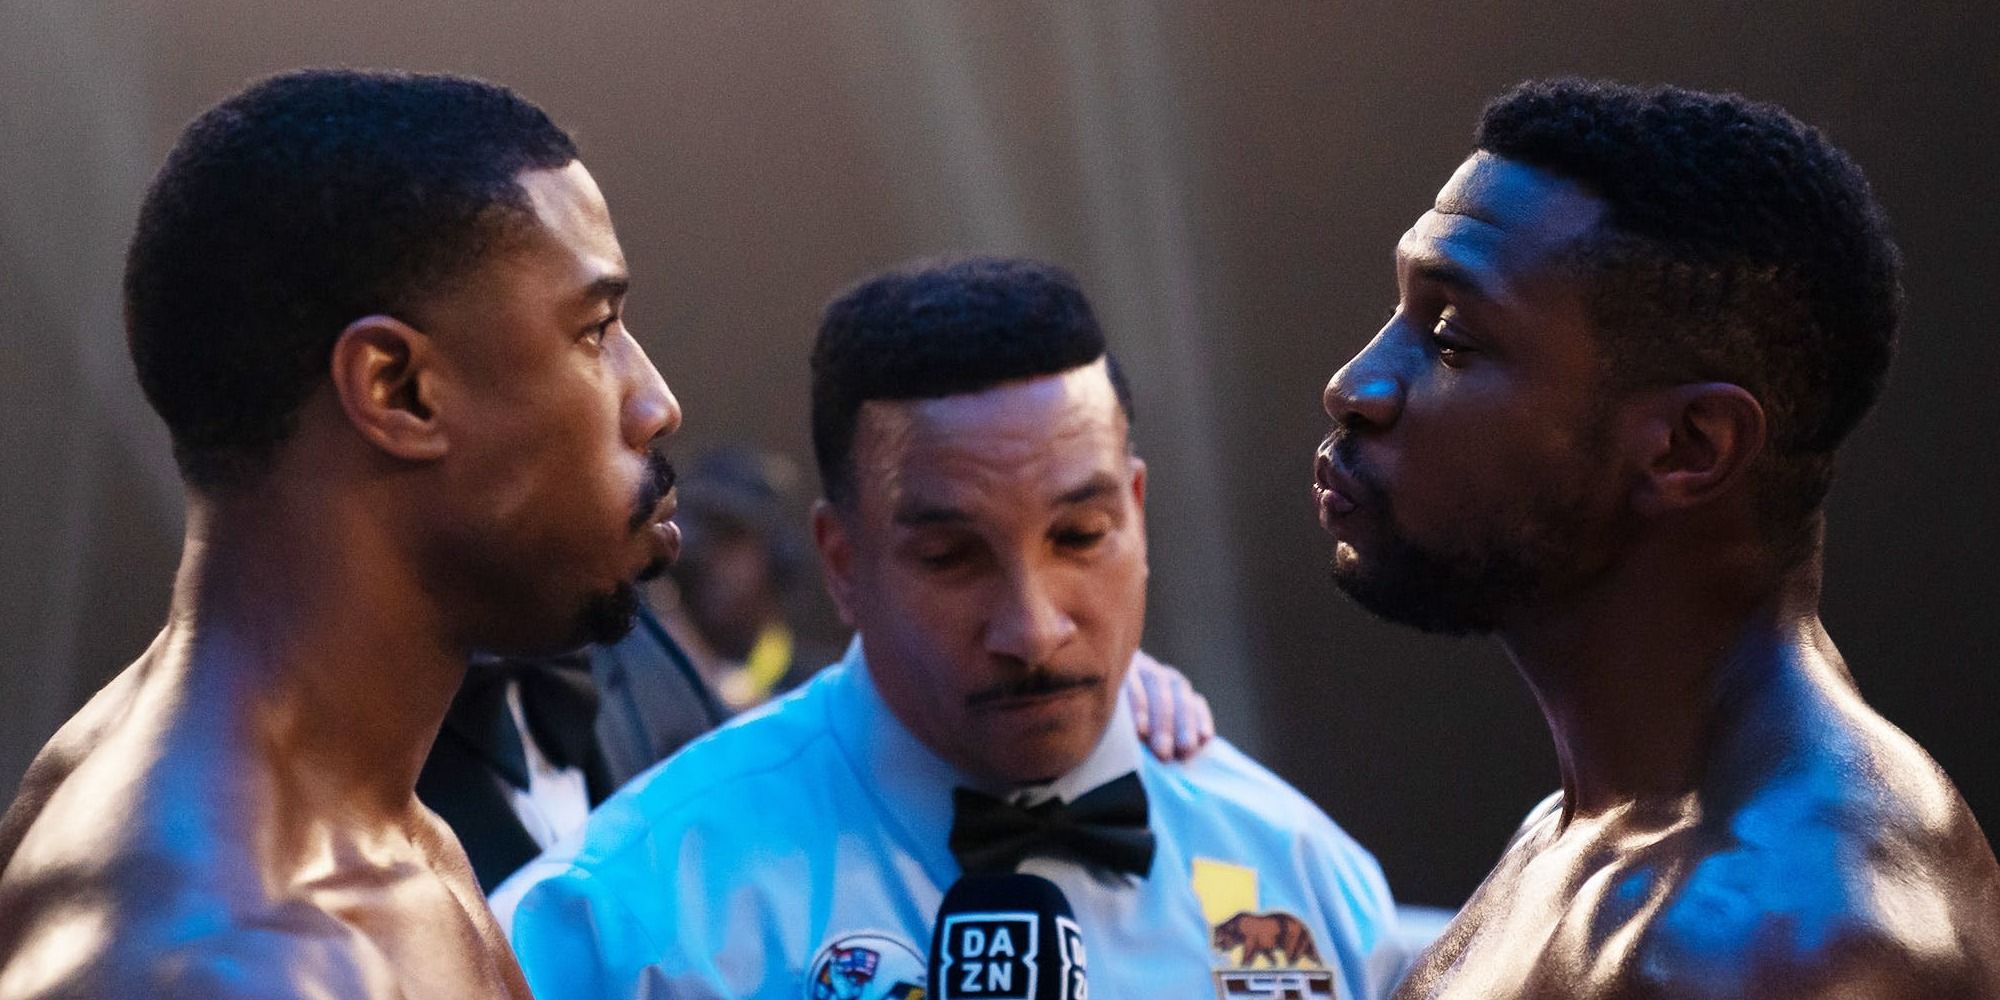 Michael B. Jordan and Jonathan Majors facing each other in the ring in Creed 3